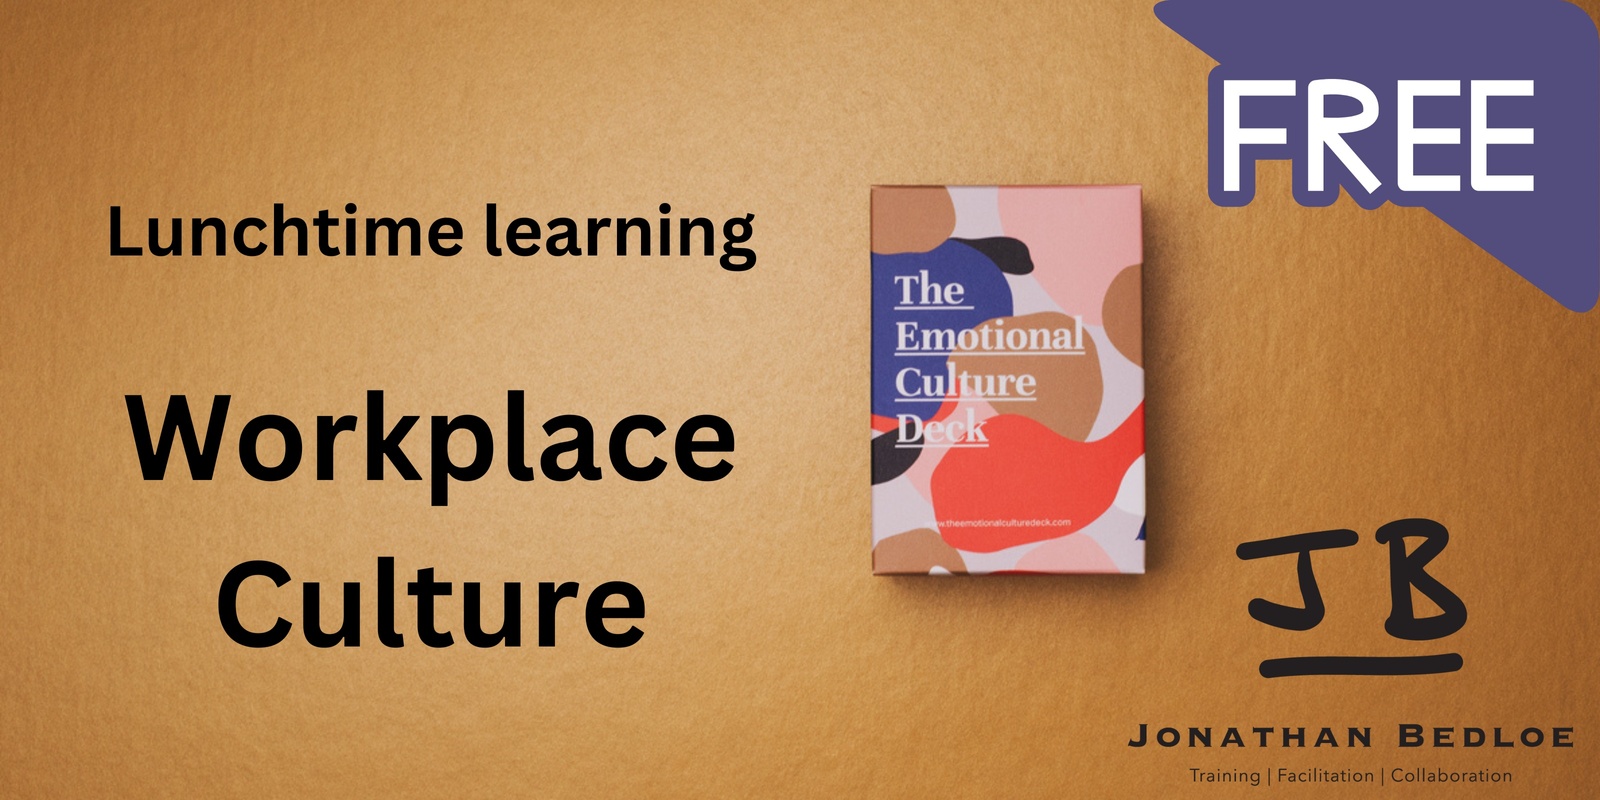 Banner image for Lunchtime Learning - Workplace culture-Kingston